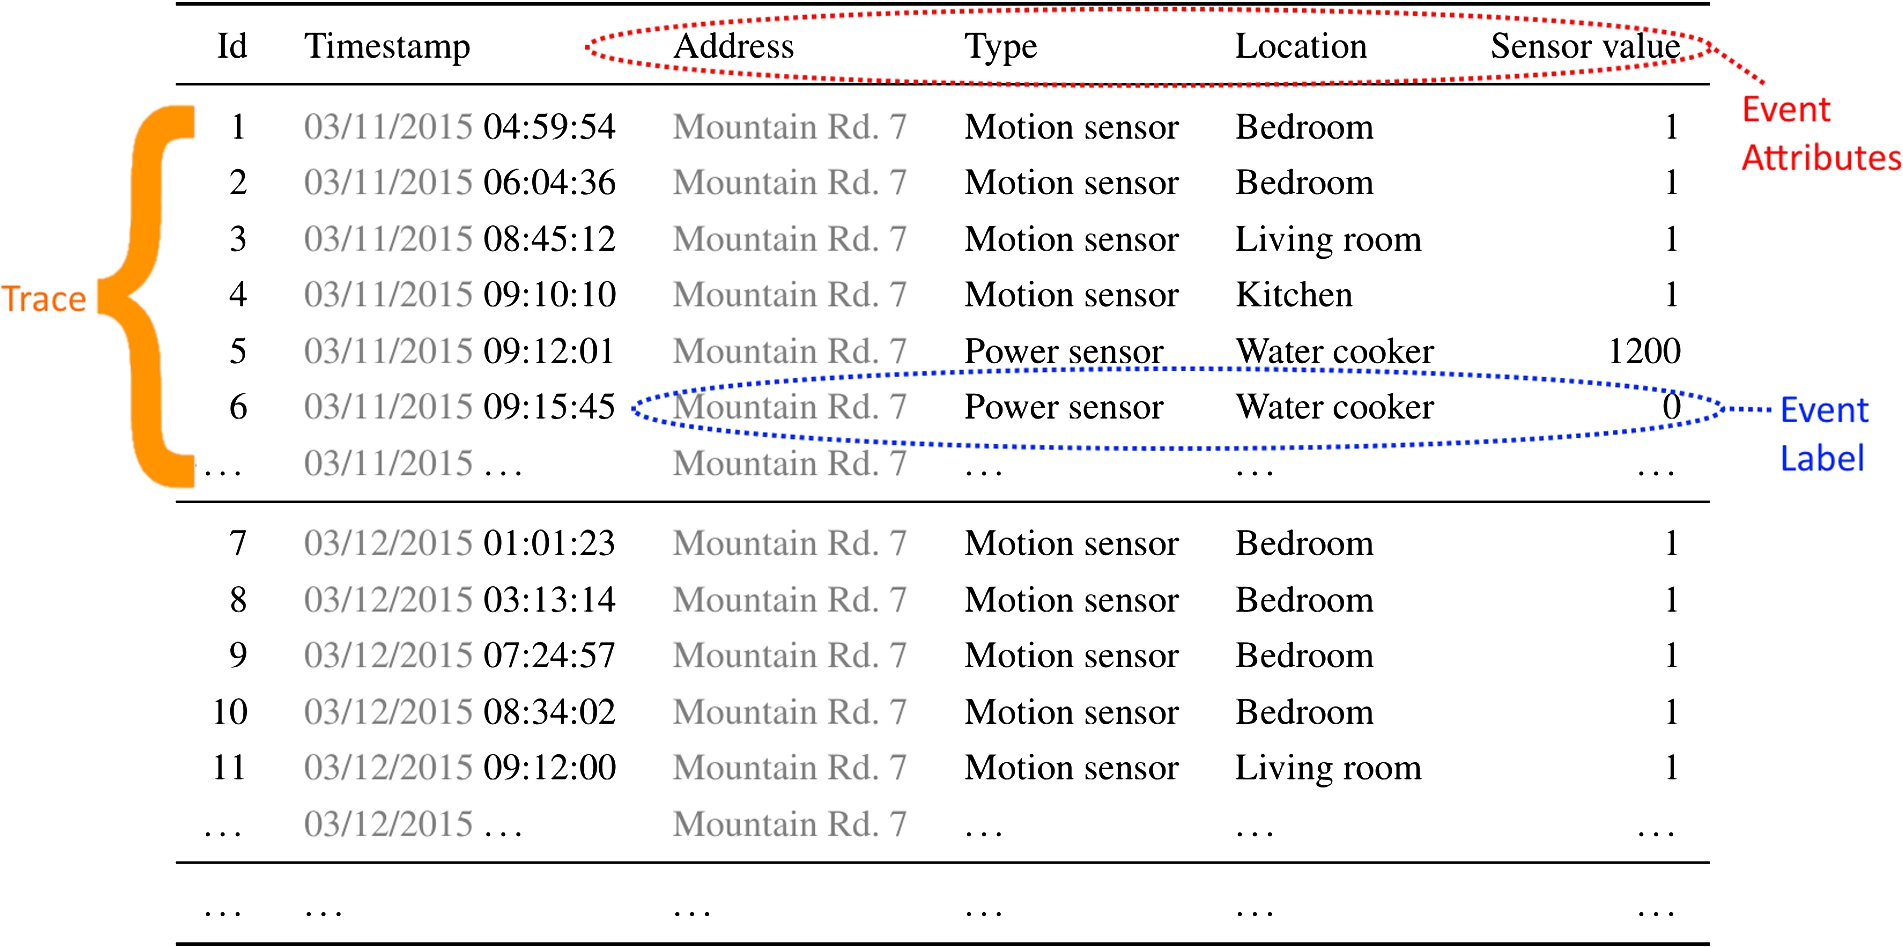 An example of an event log from a smart home environment